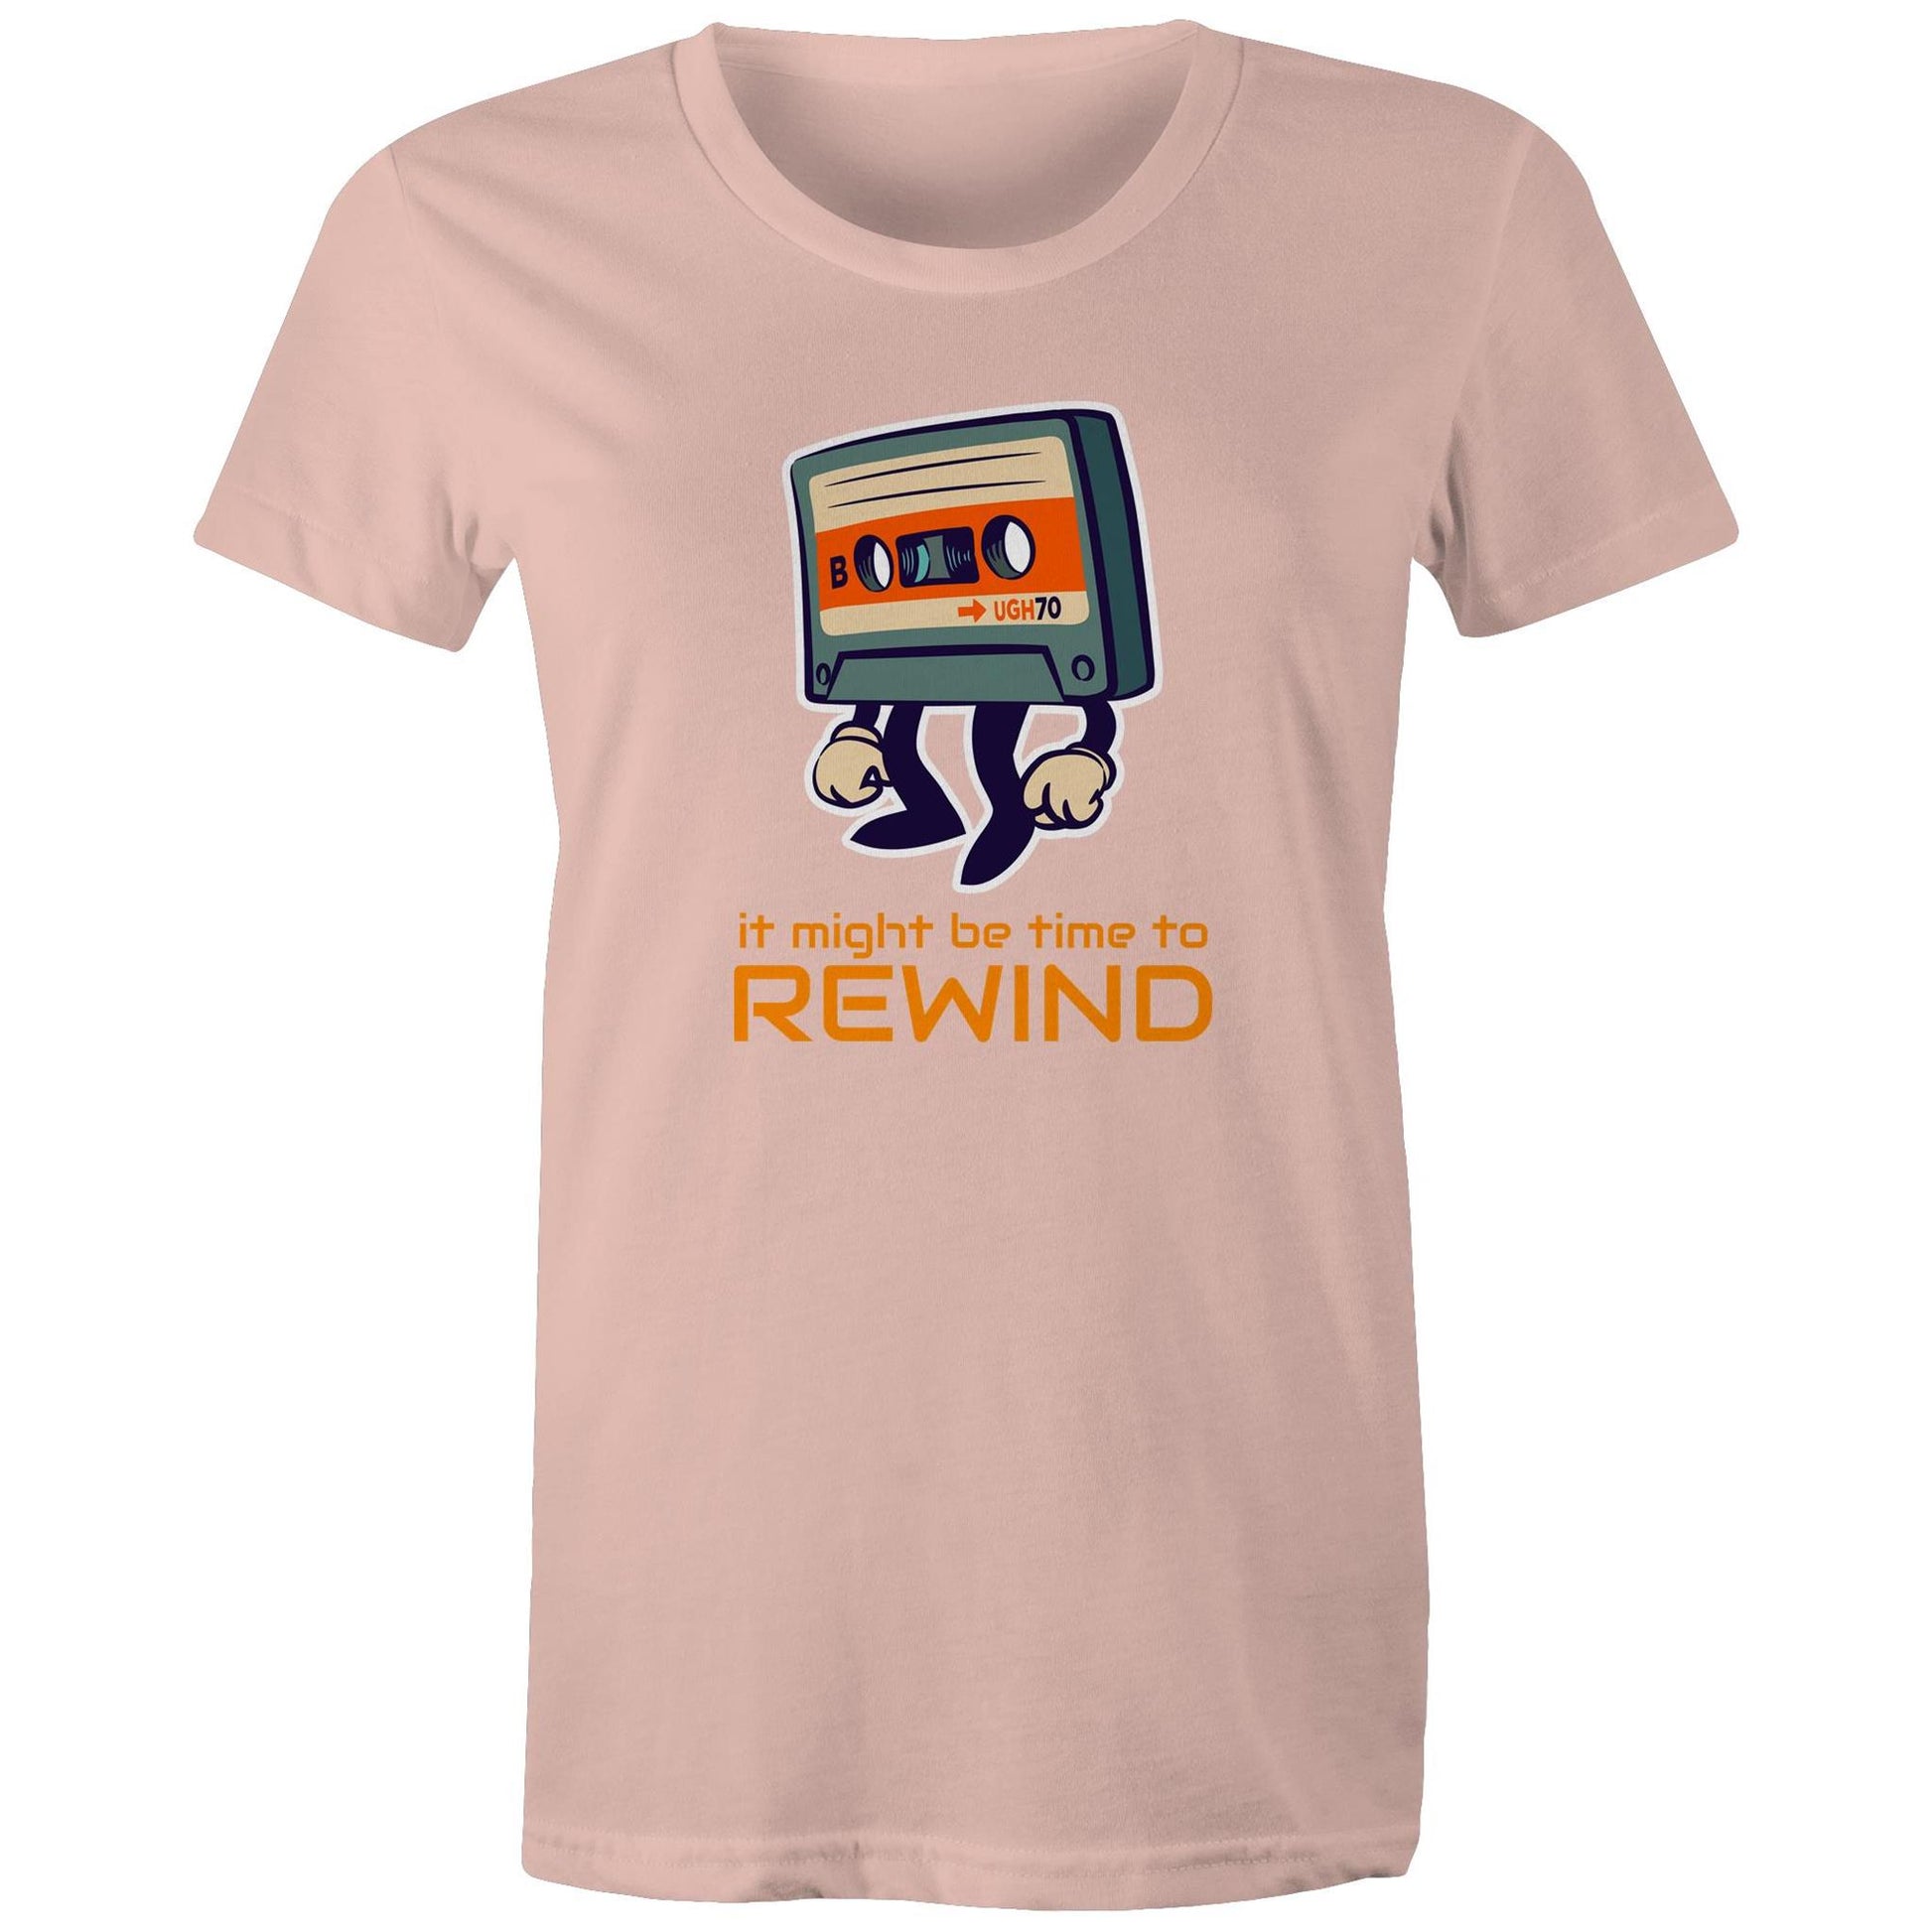 It Might Be Time To Rewind - Womens T-shirt Pale Pink Womens T-shirt Music Retro